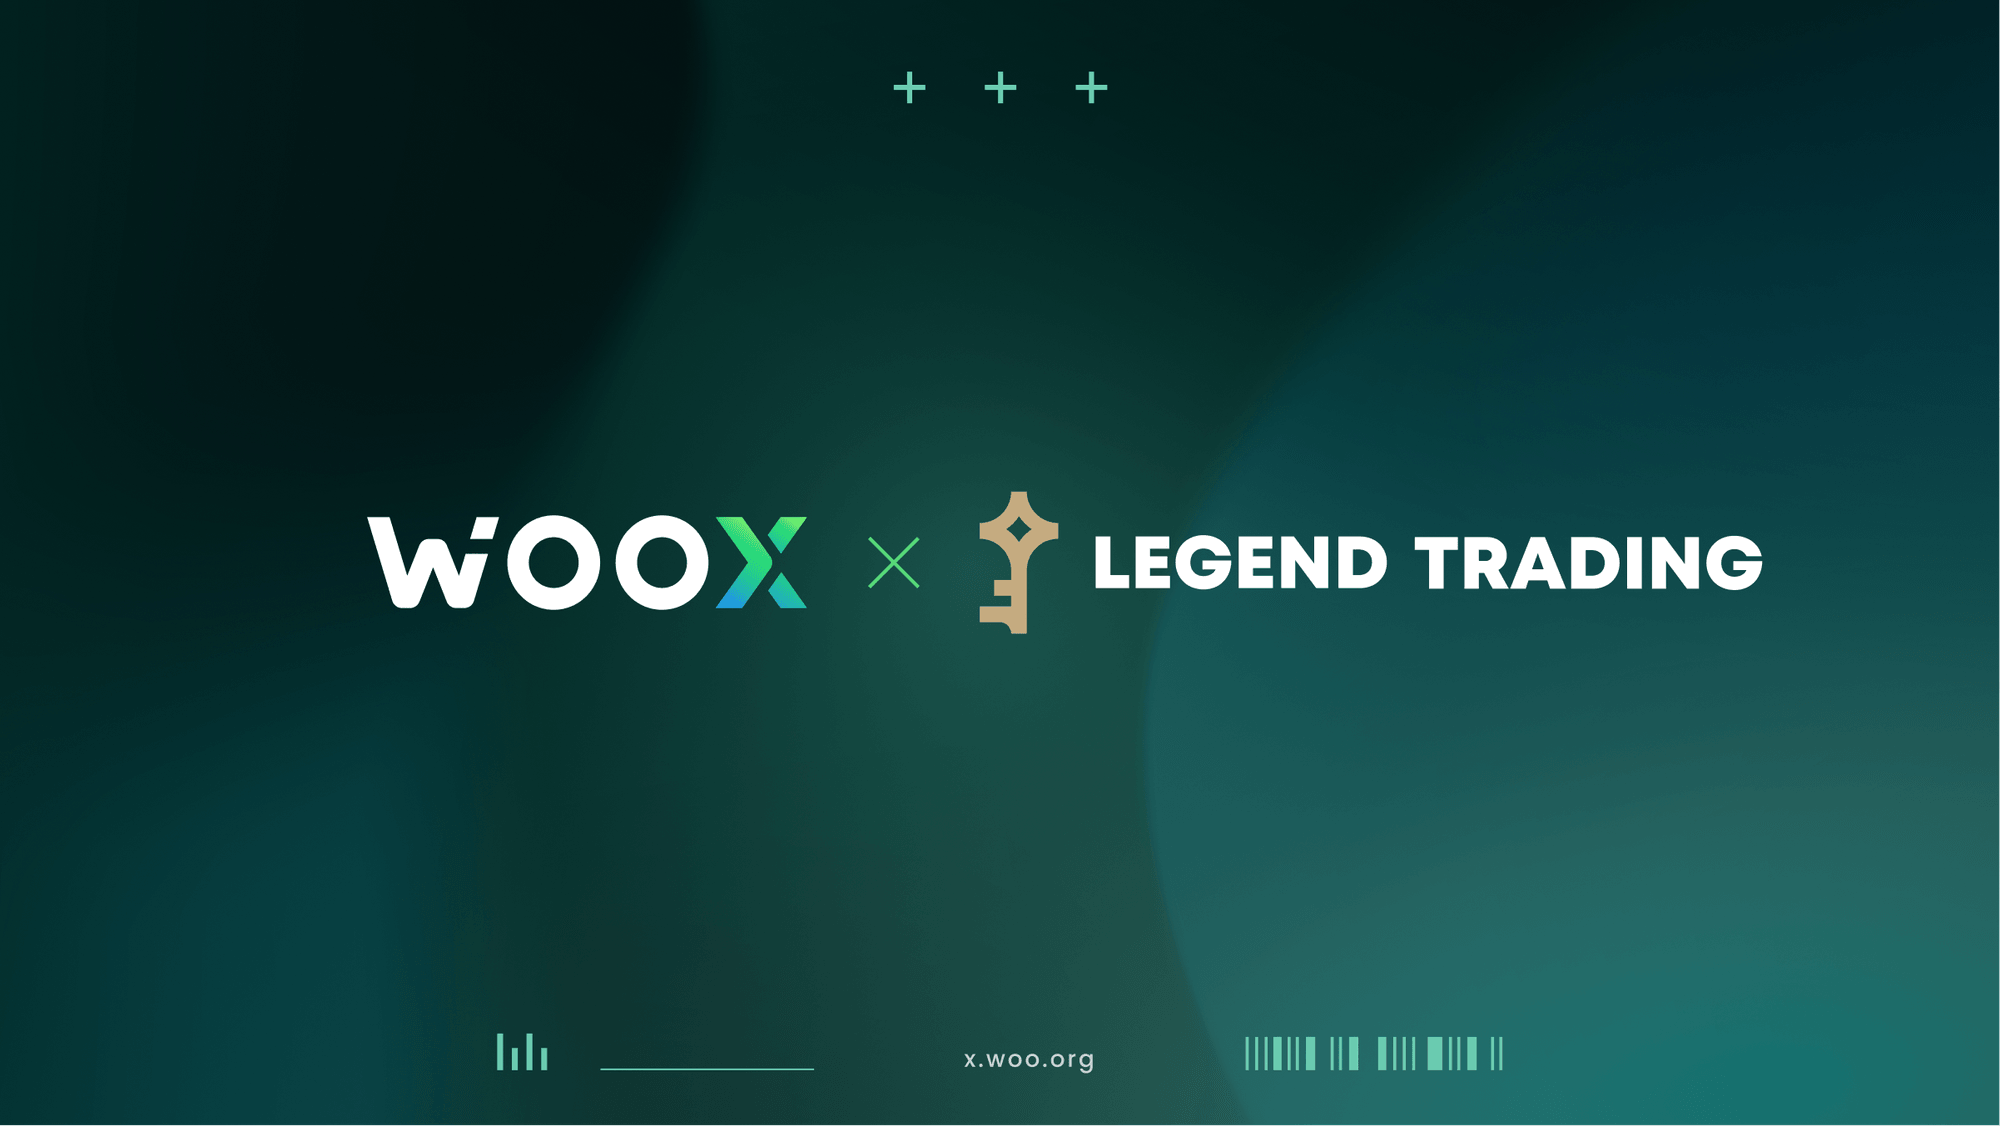 WOO X collaborates with Legend Trading to enhance fiat on-ramp services for expanded retail audience reach